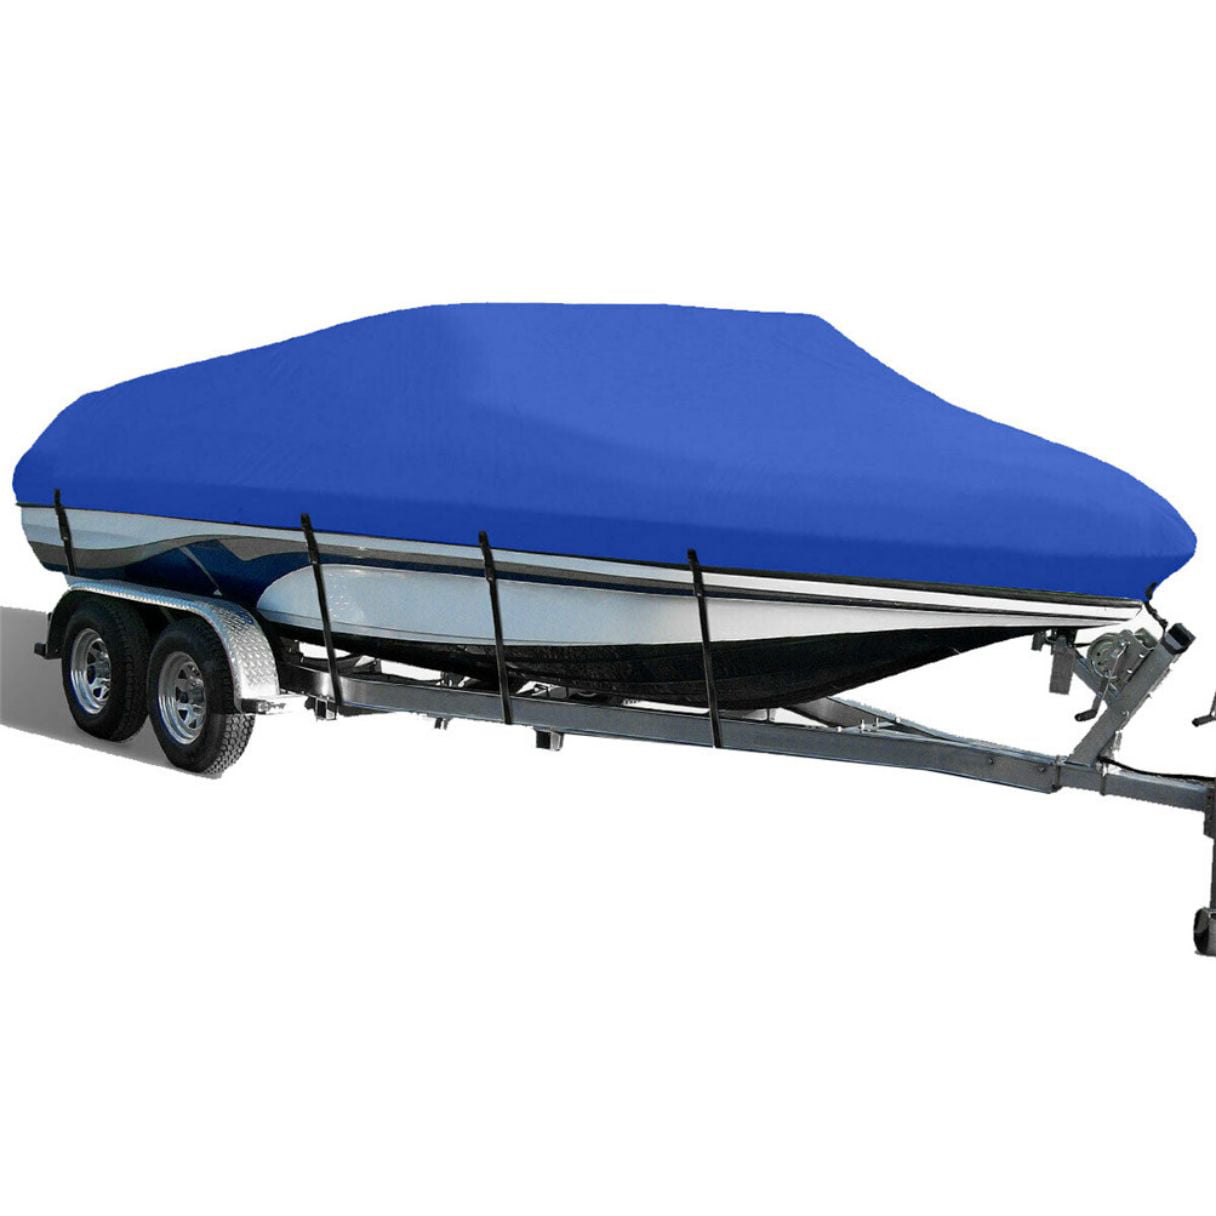  iCOVER Trailerable Boat Cover with Support Pole- 14